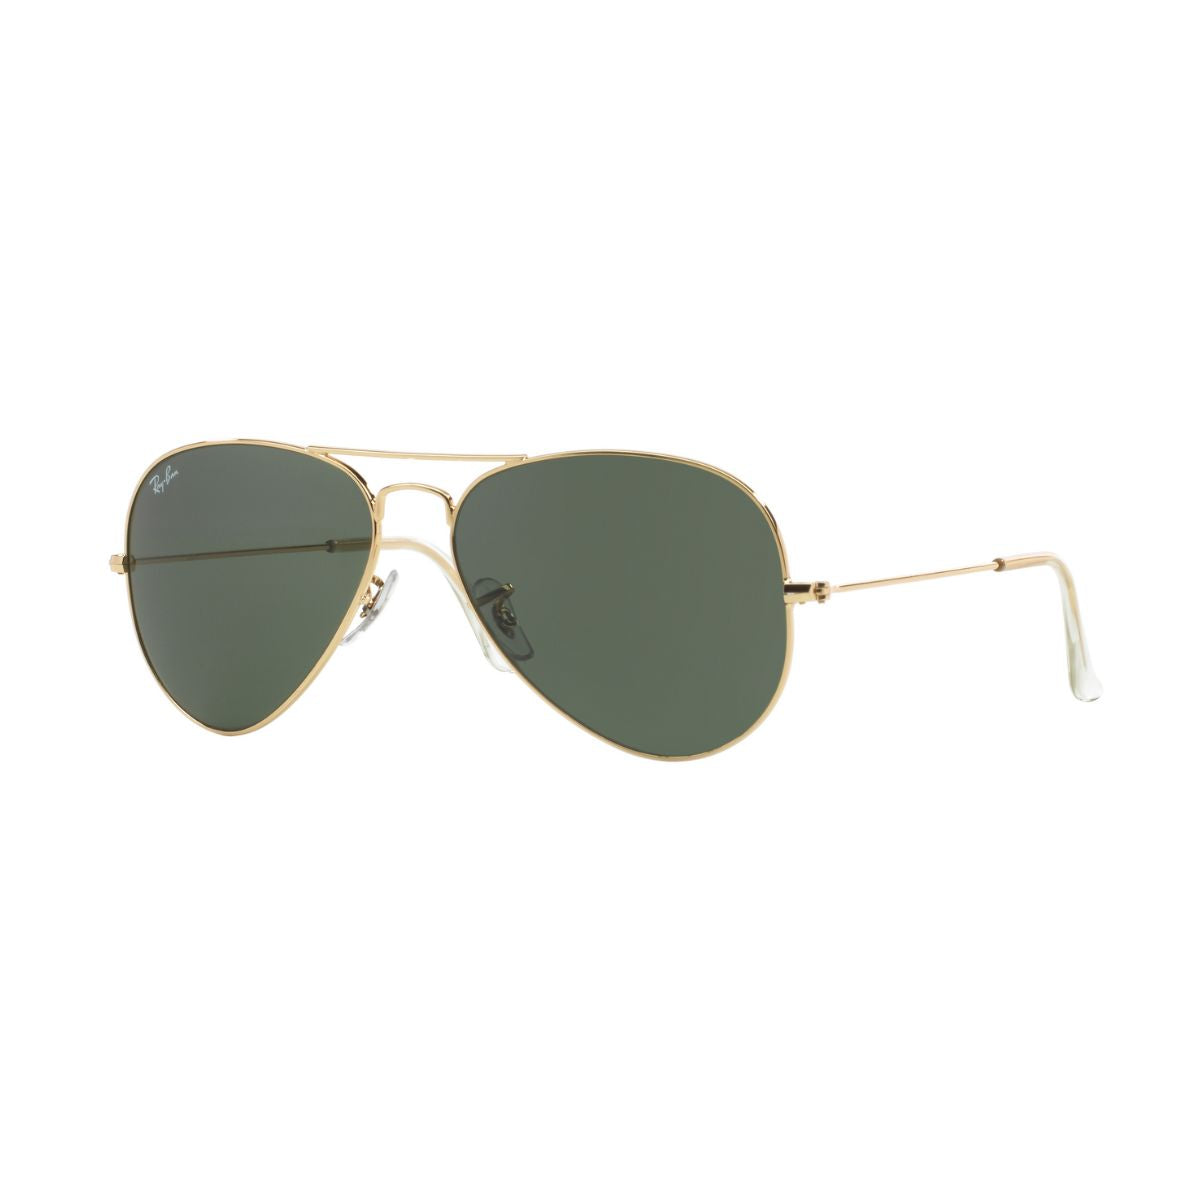 "Best Rayban 3025 L0205 Stylish UV Protection Sunglass For Men And Women At Optorium"